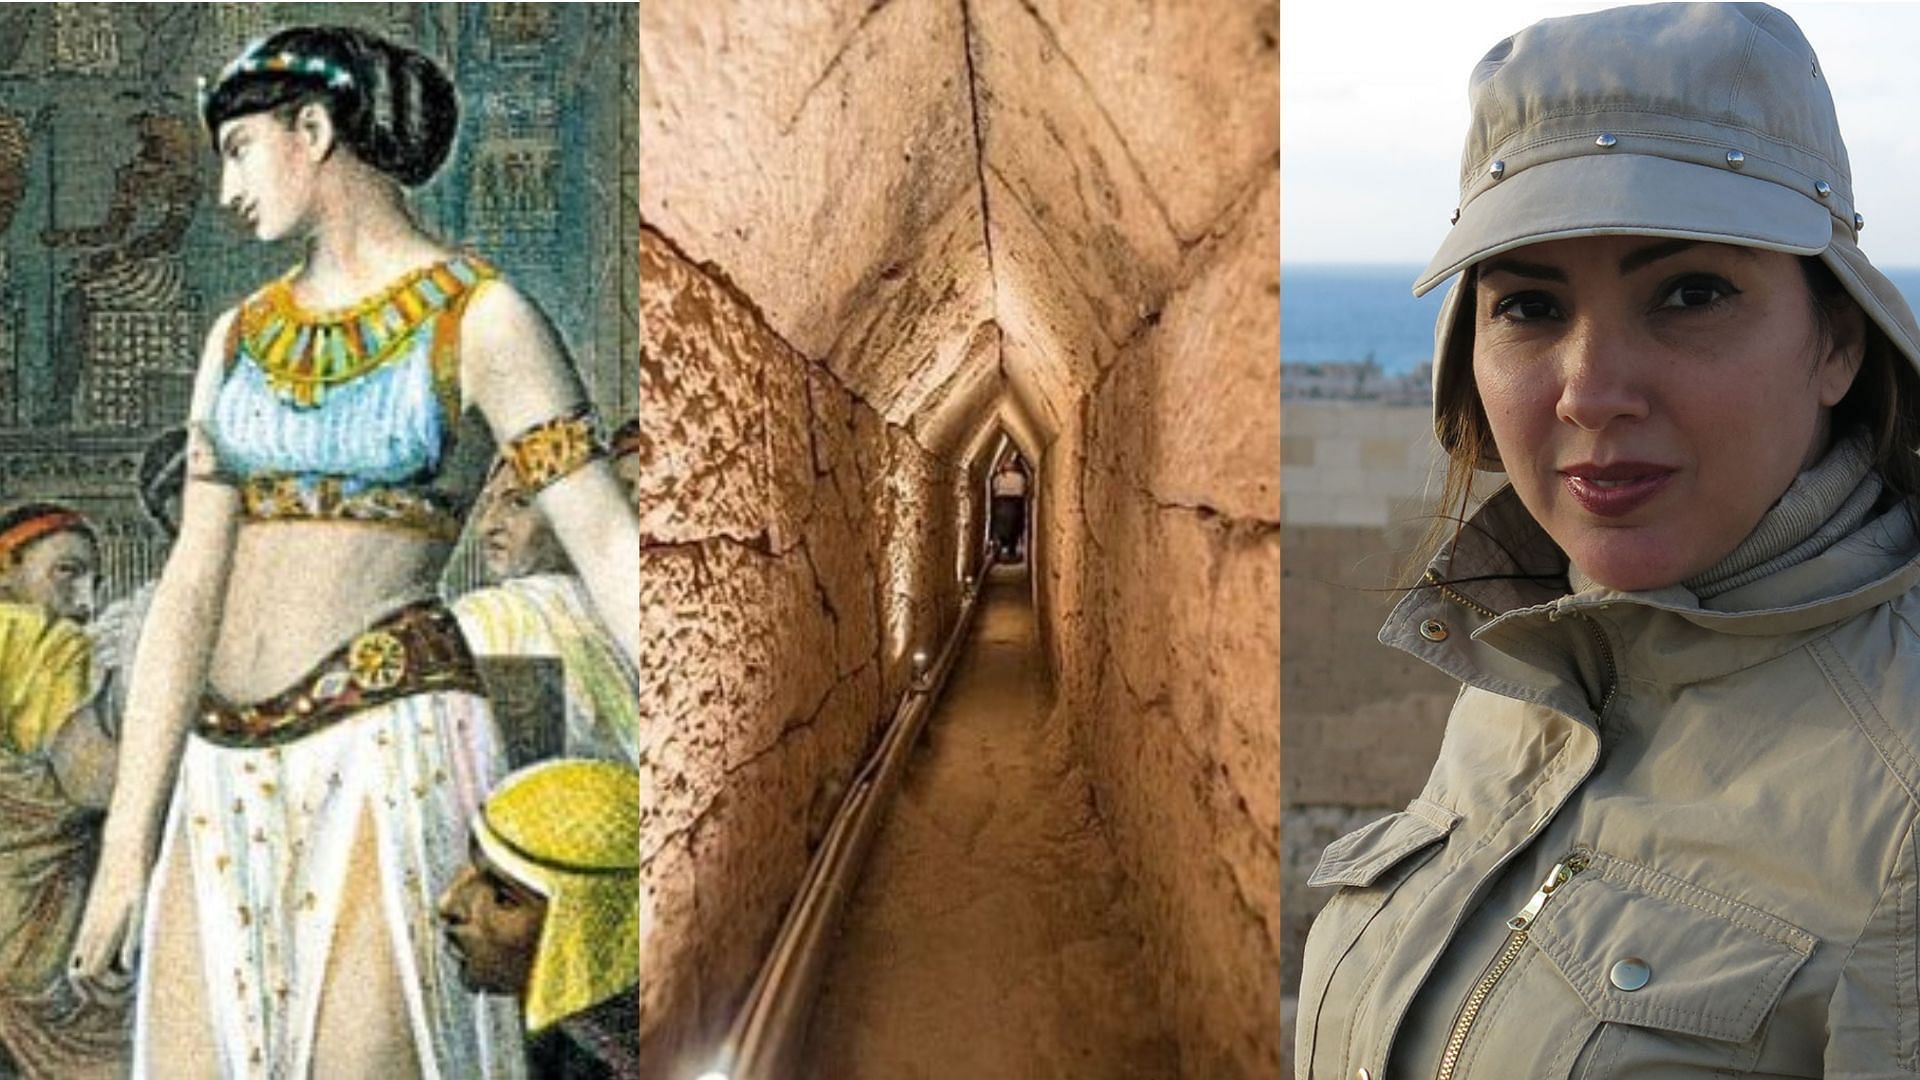 Kathleen Martinez discovers tunnel that could lead to Cleopatra